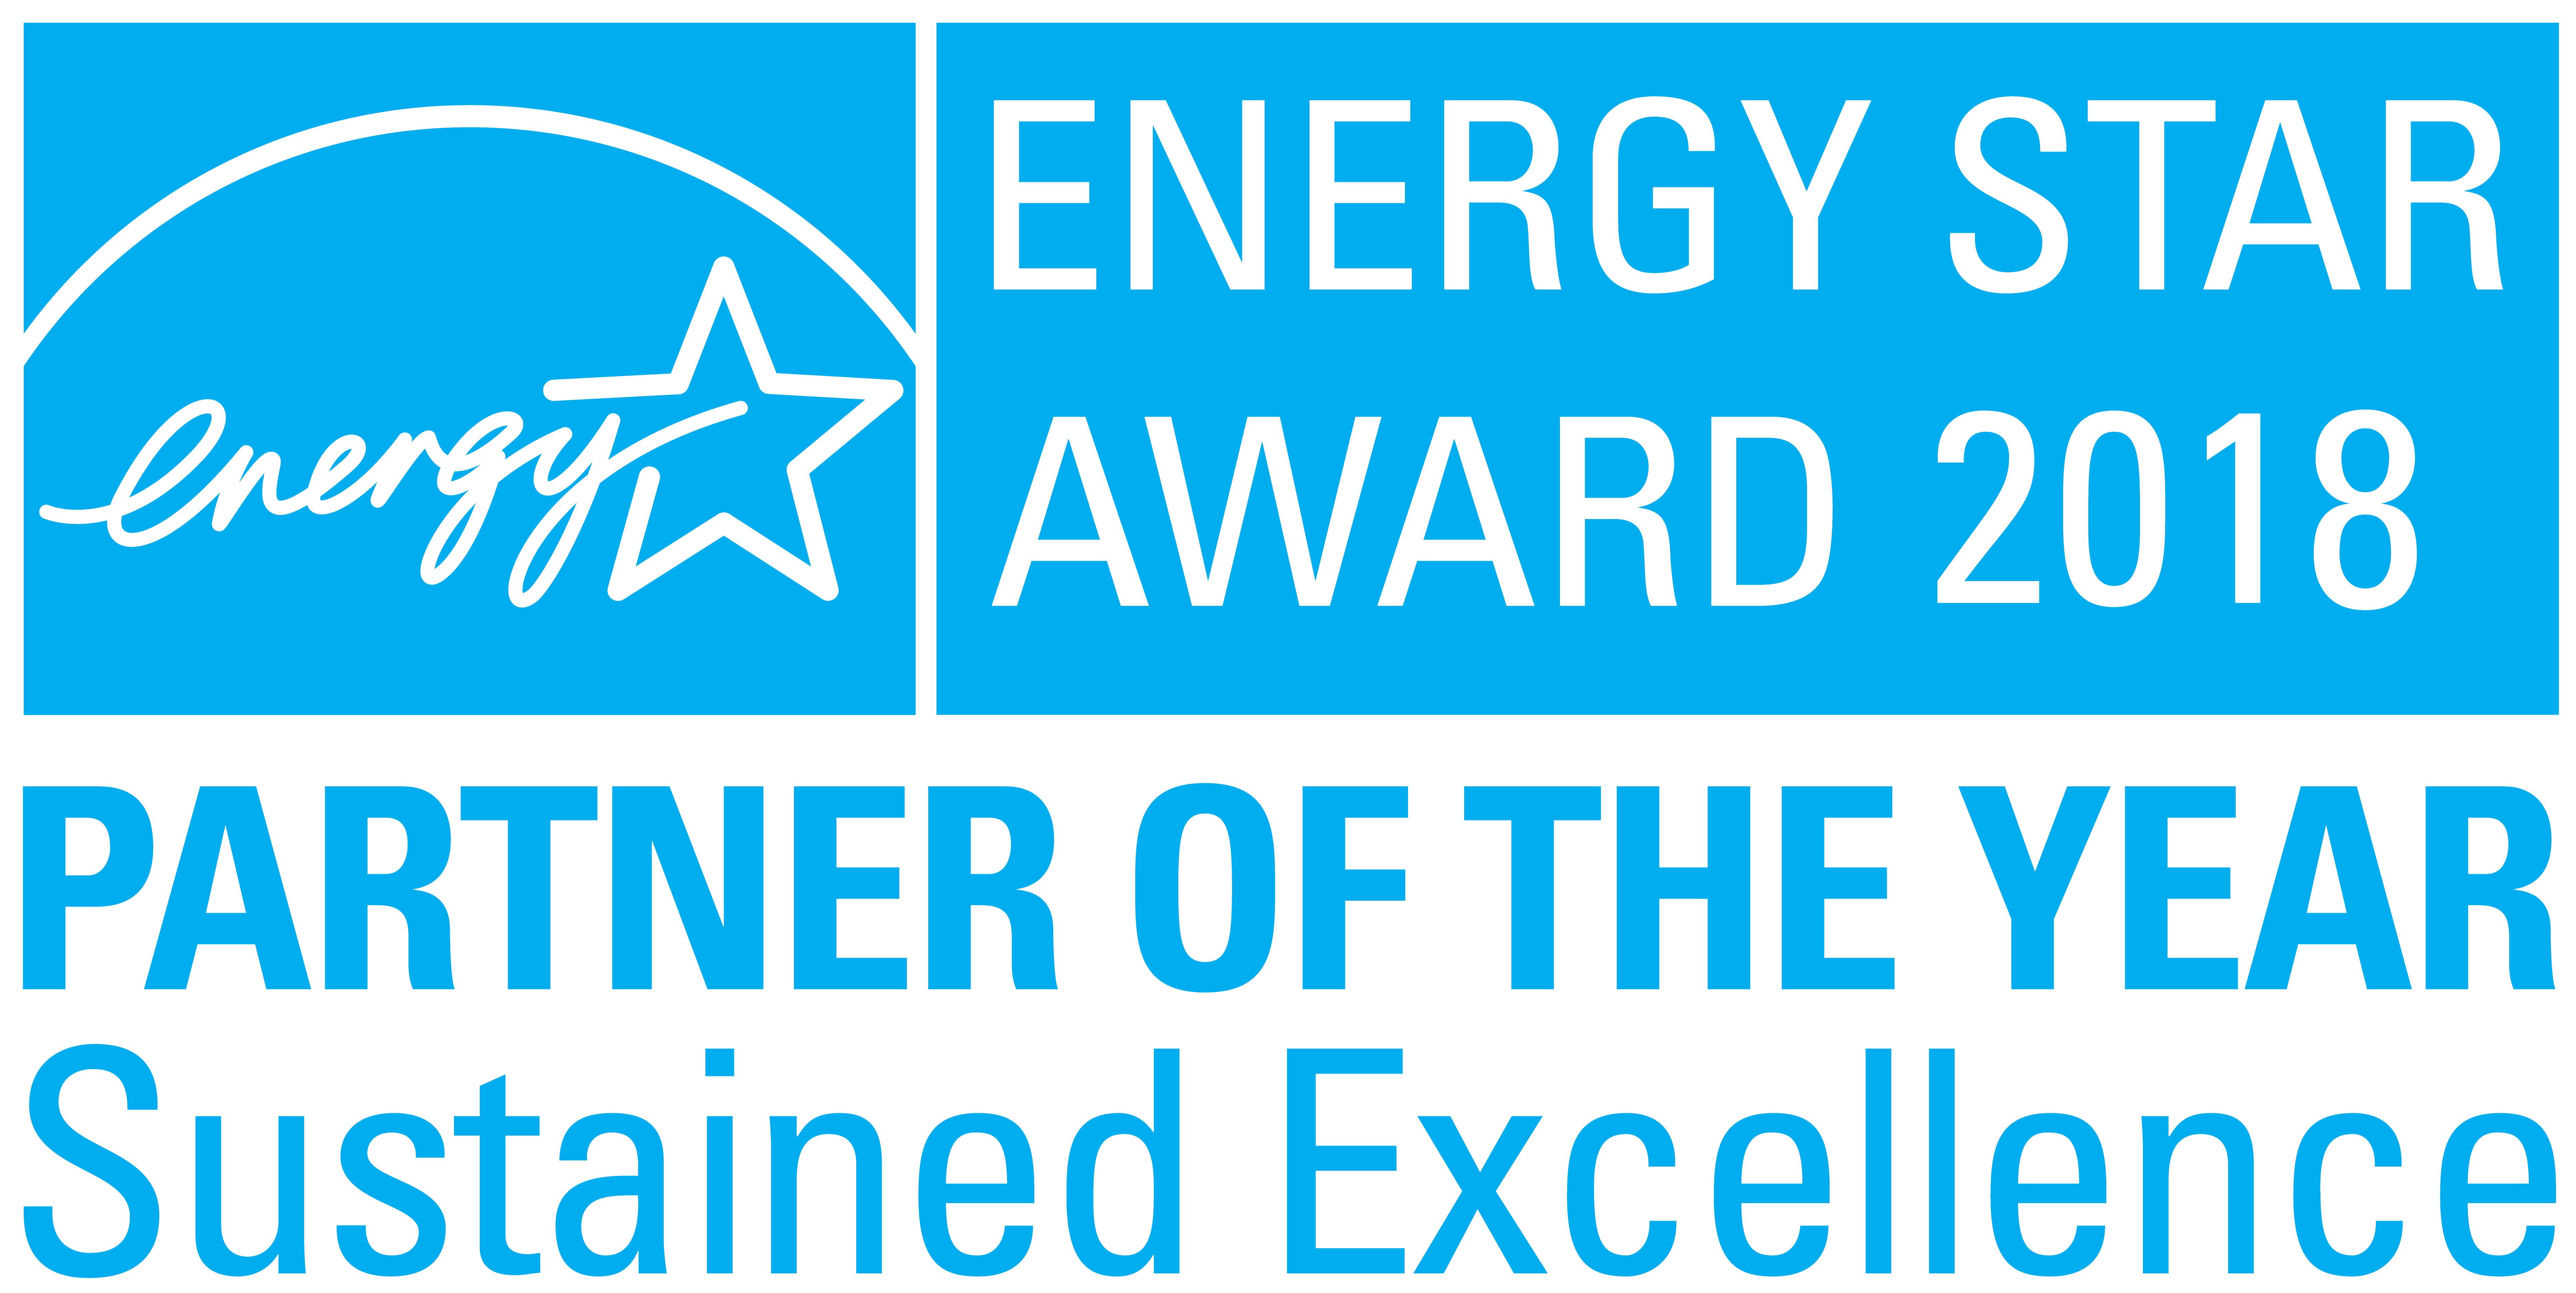 ENERGY STAR Award 2018 - Partner of the Year Sustained Excellence